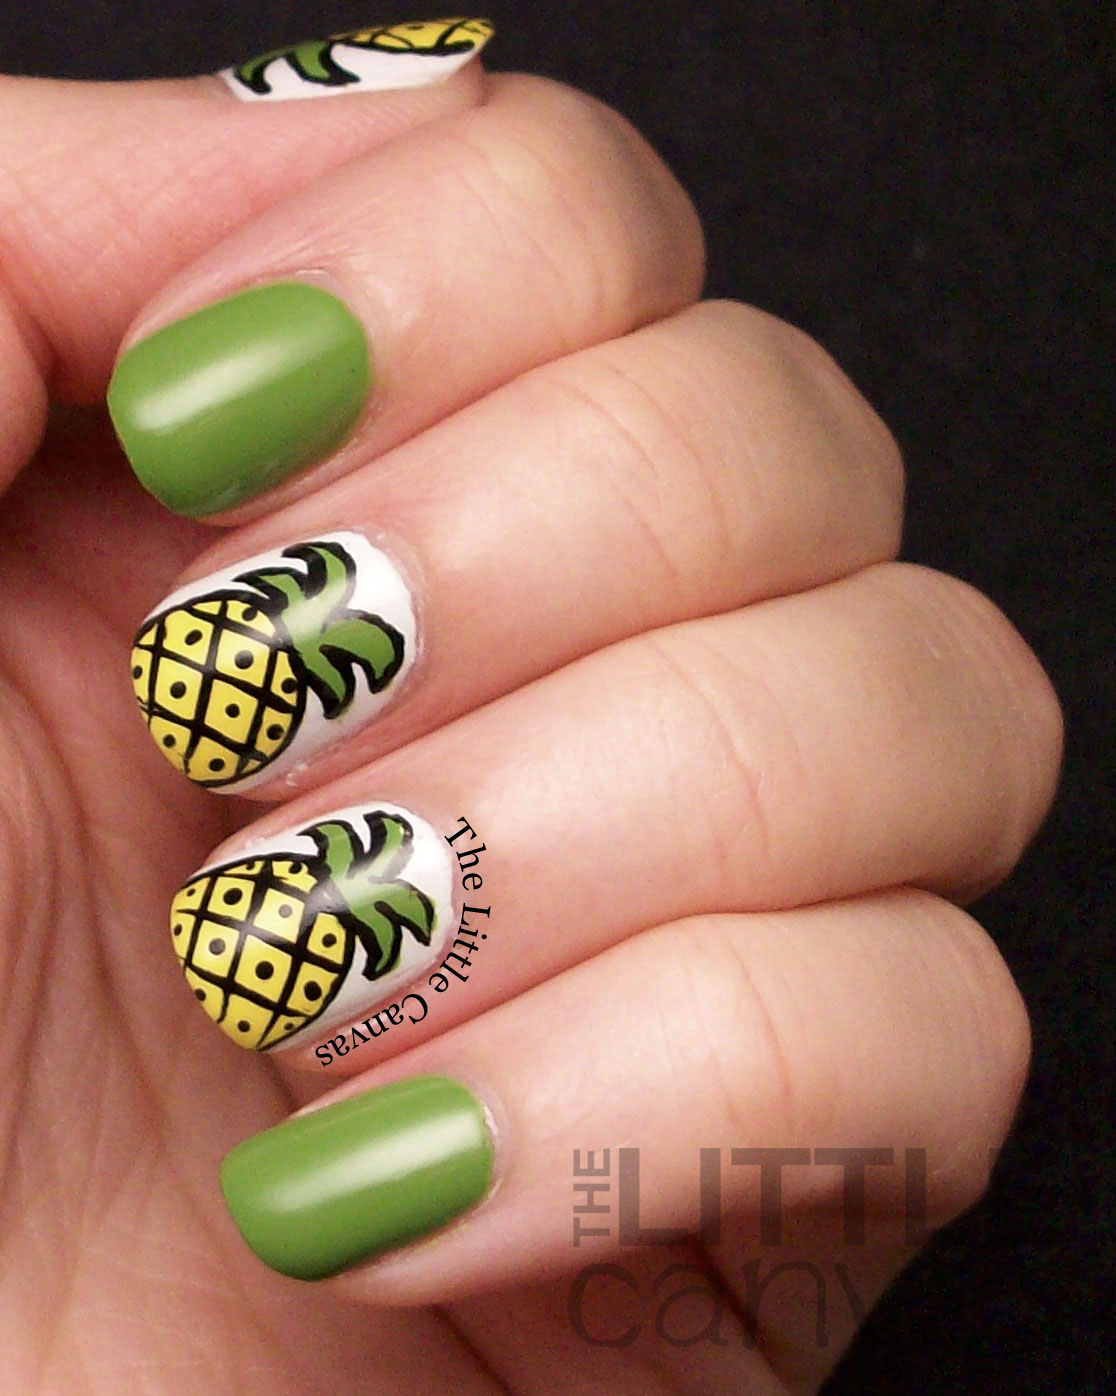 Pineapple slices - My polished nails